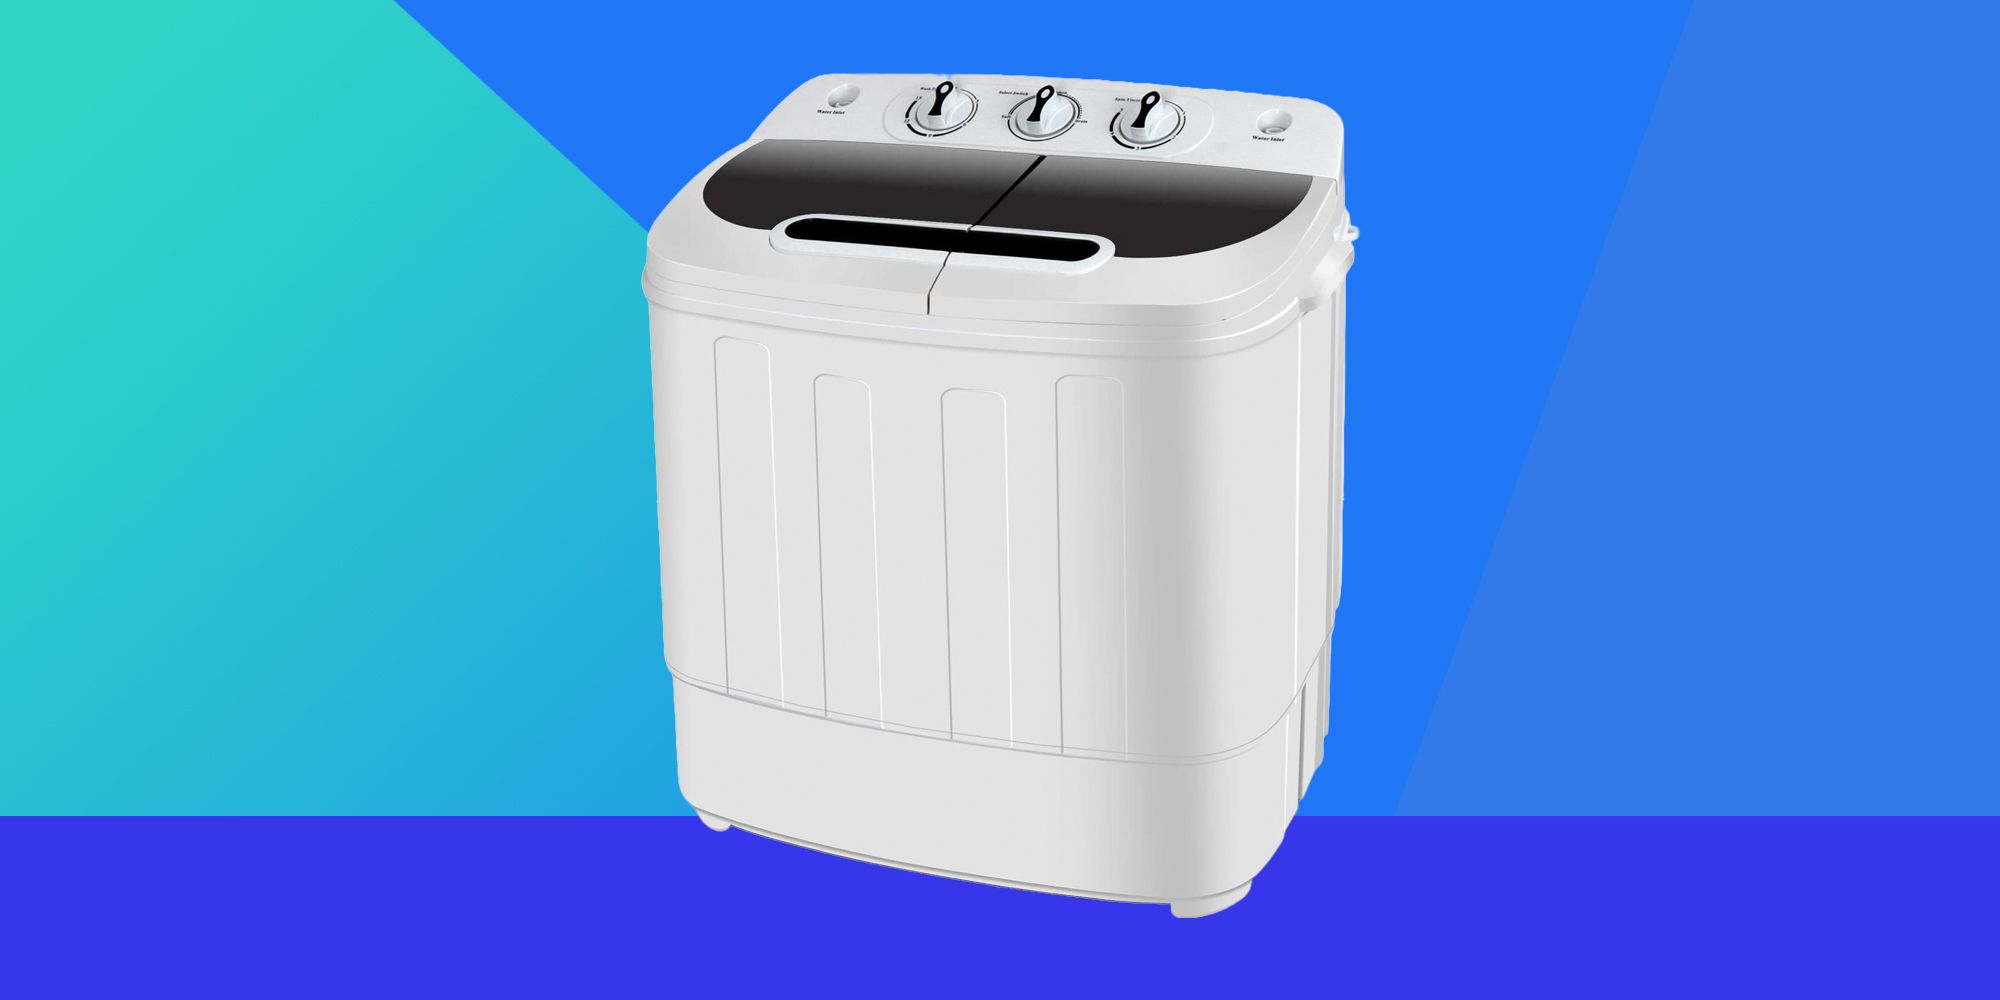  BLACK+DECKER Small Portable Washer, Washing Machine for  Household Use, Portable Washer 1.7 Cu. Ft. with 6 Cycles, Transparent Lid &  LED Display : Appliances